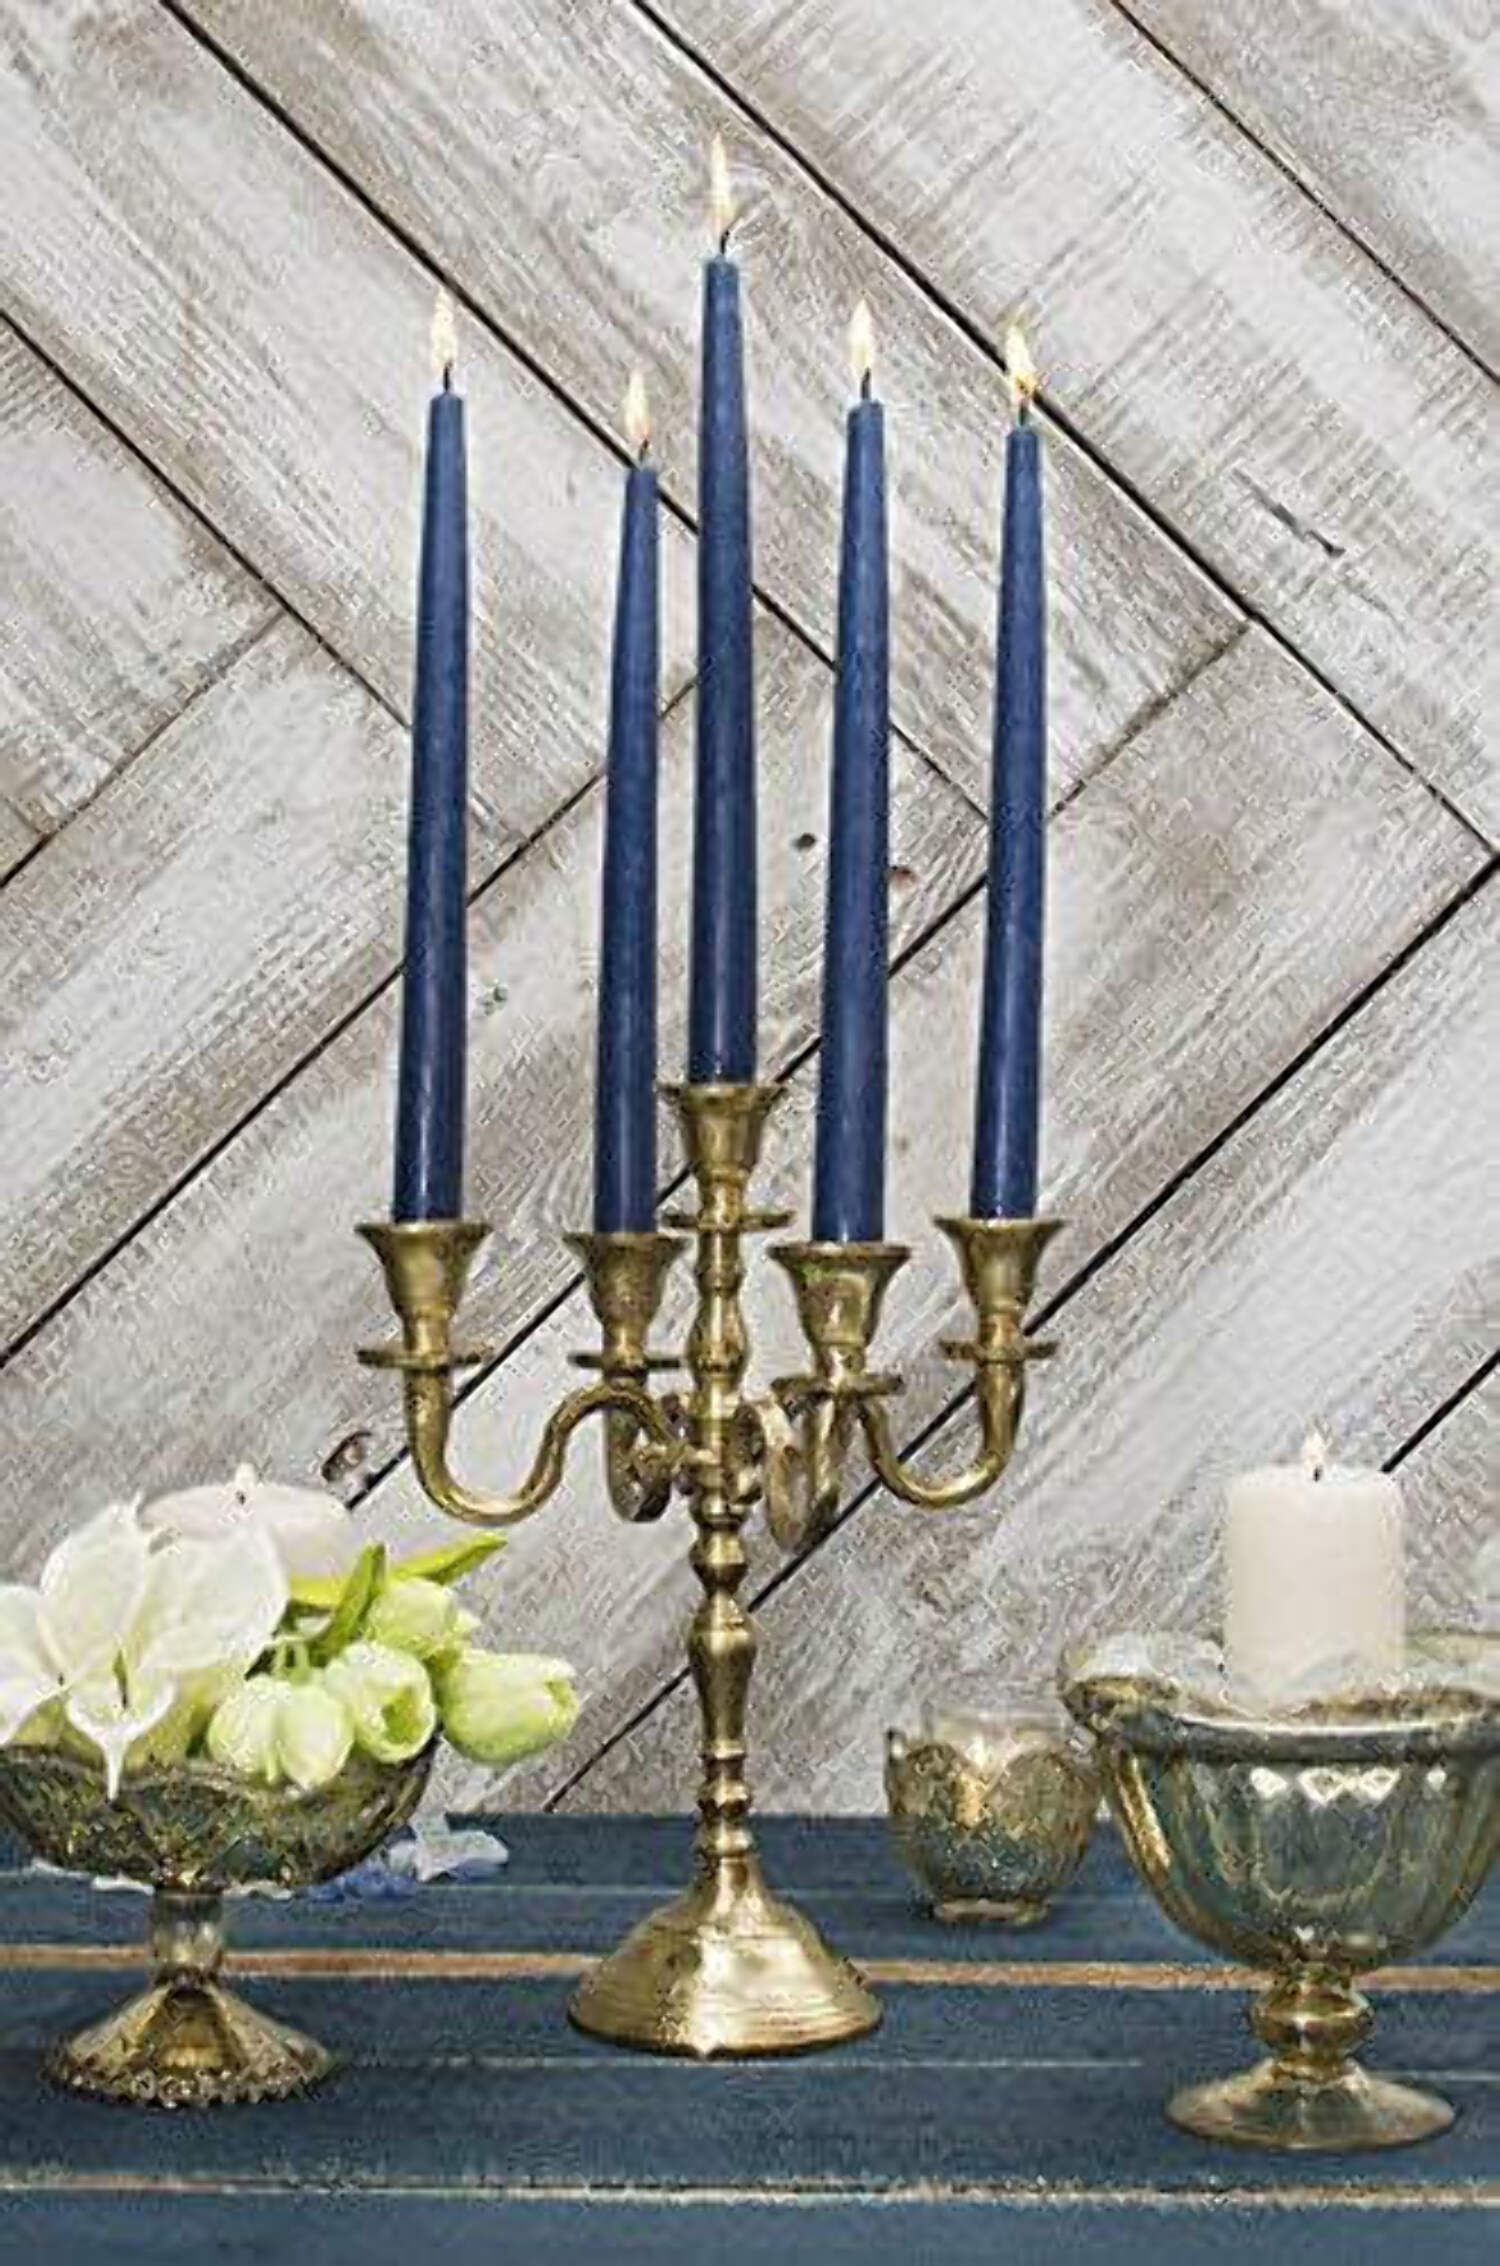 Cobalt Blue Taper Candles 12 Inch Tall Set of 12 Burn 10 Hours - image 1 of 3